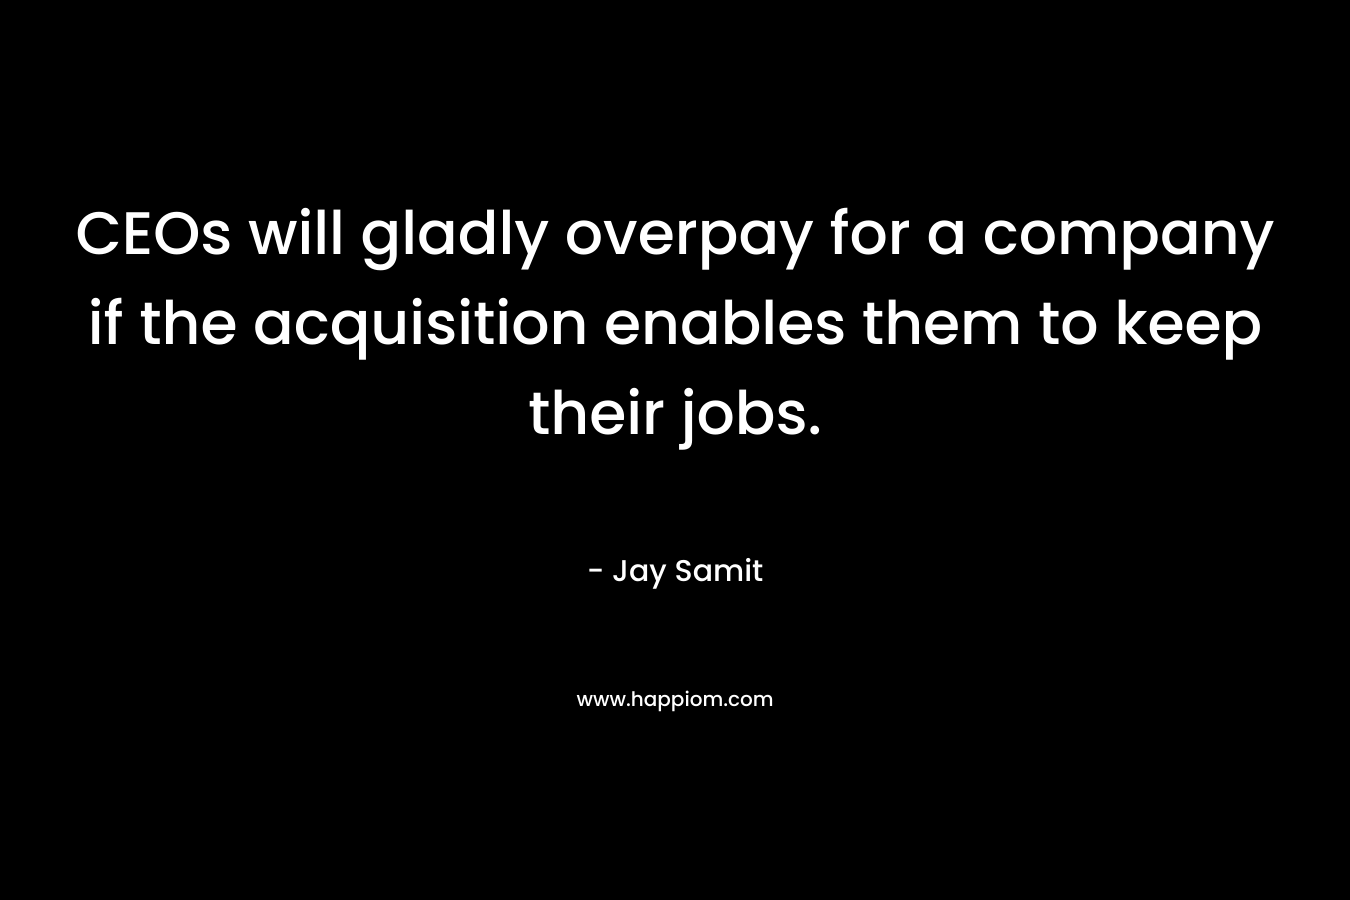 CEOs will gladly overpay for a company if the acquisition enables them to keep their jobs.